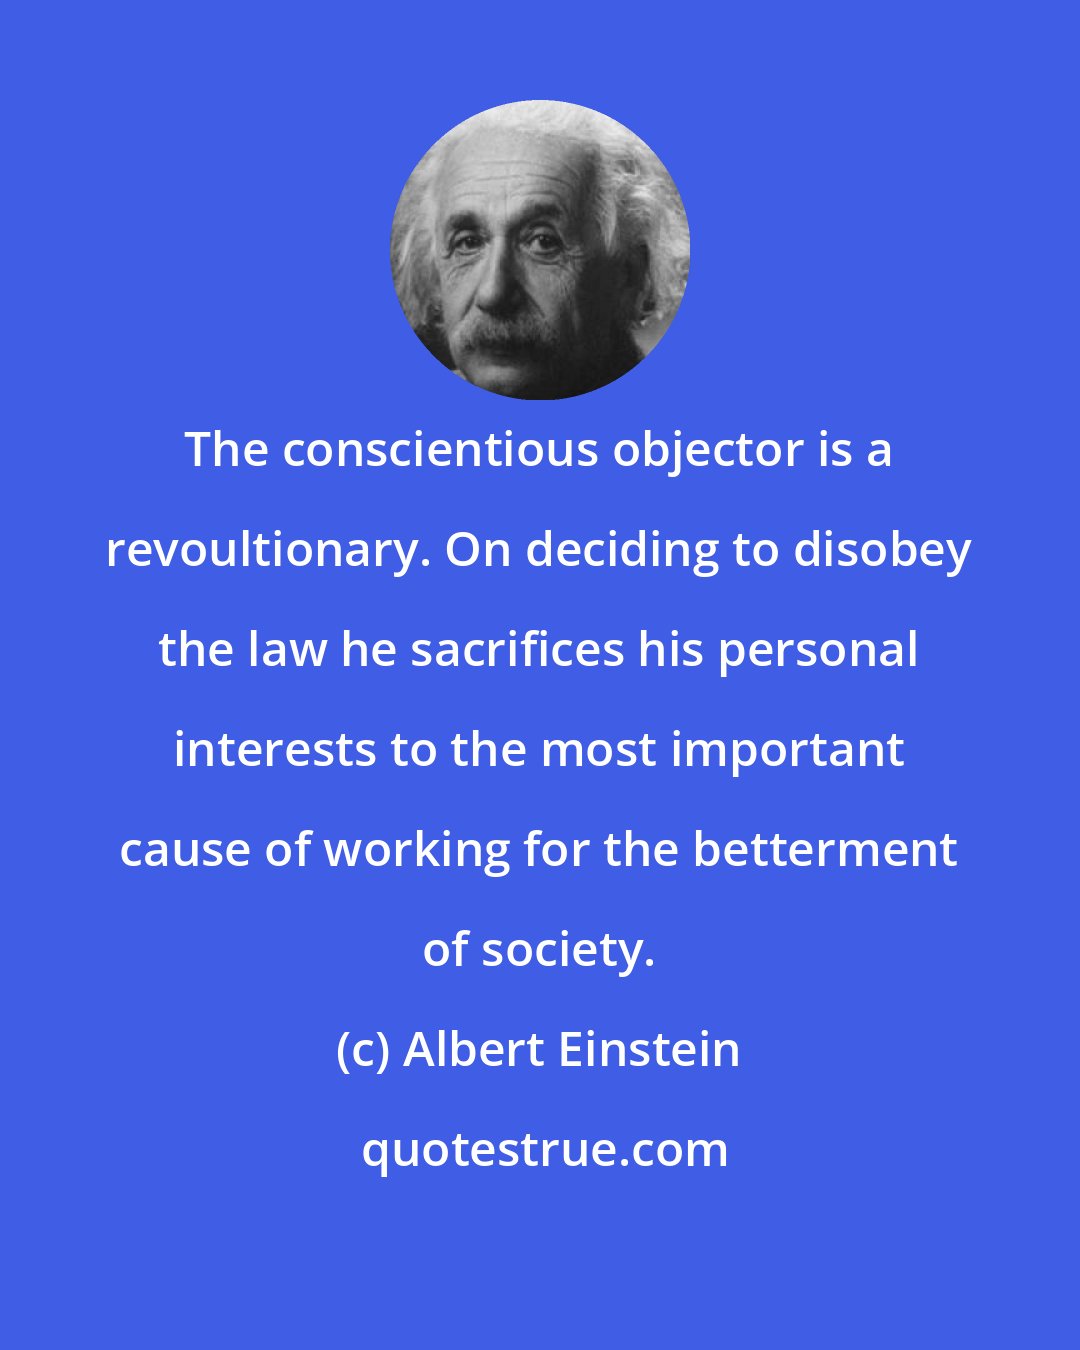 Albert Einstein: The conscientious objector is a revoultionary. On deciding to disobey the law he sacrifices his personal interests to the most important cause of working for the betterment of society.